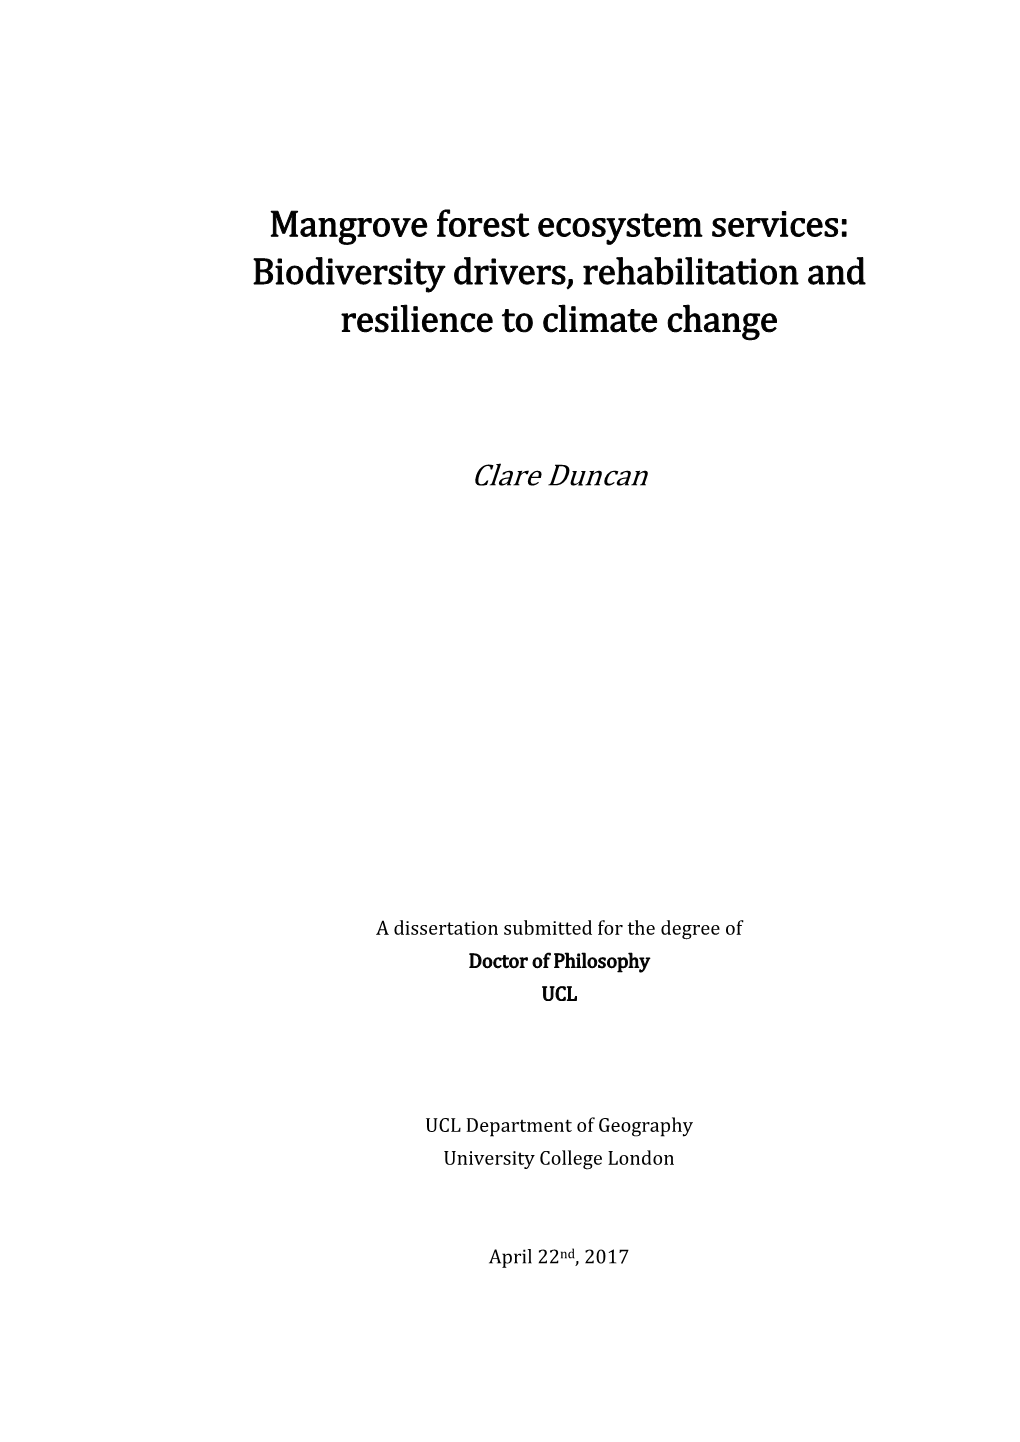 Mangrove Forest Ecosystem Services: Biodiversity Drivers, Rehabilitation and Resilience to Climate Change